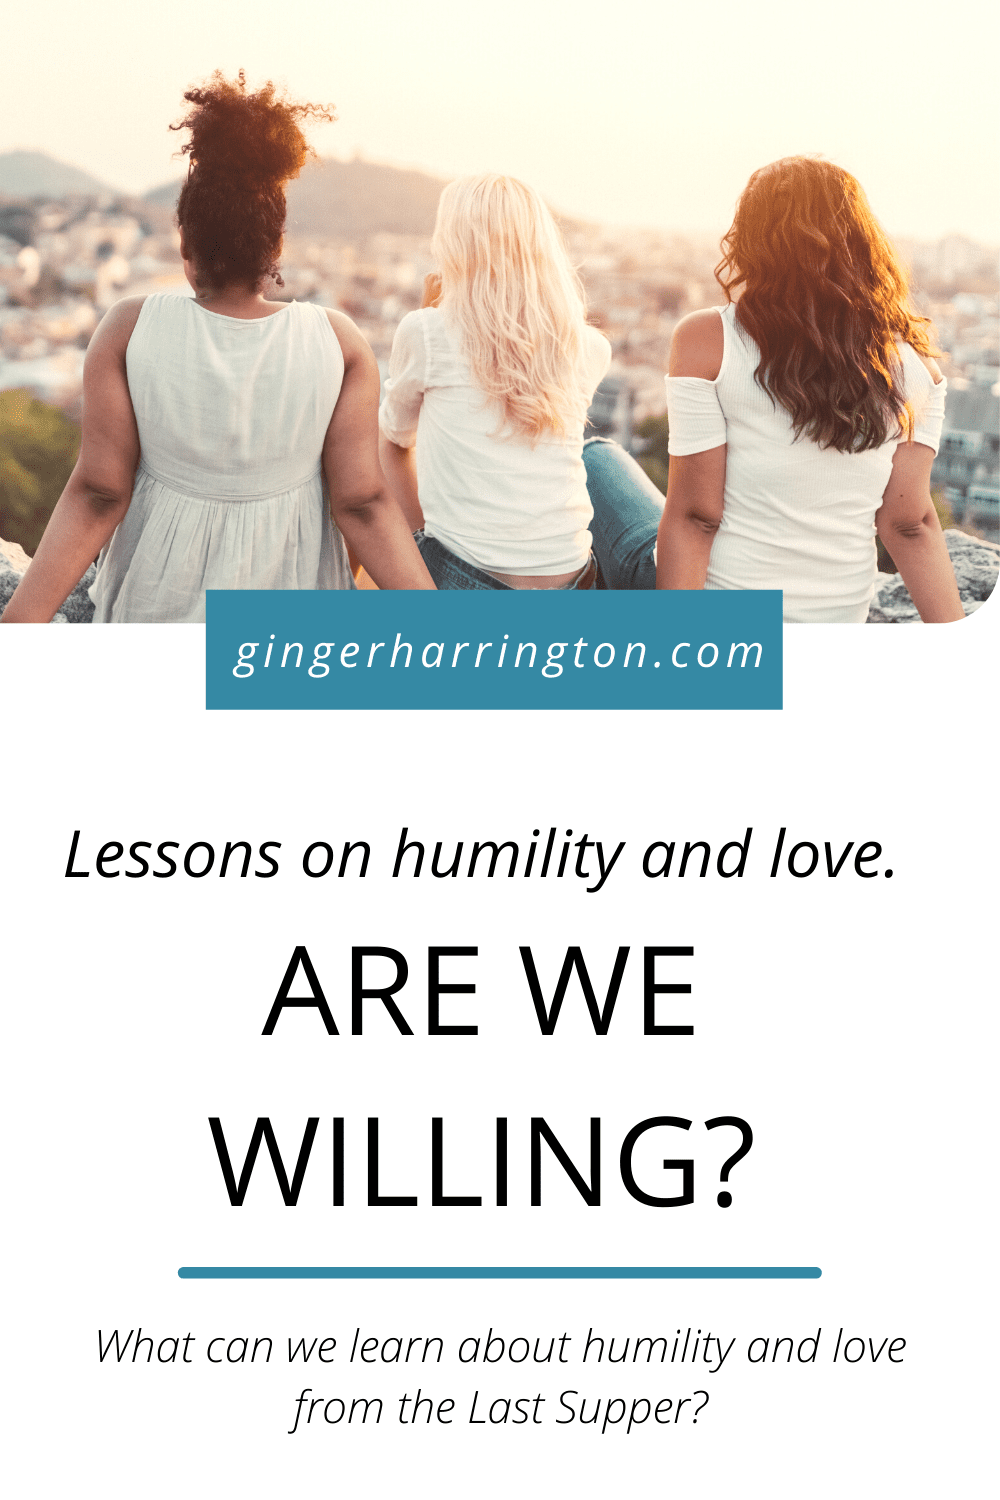 As we prepare for Easter, reflect on these lessons about love and humility from Jesus’ teachings at the Last Supper. What can we learn from Christ’s words and example in his last meal with his disciples? Jesus demonstrated the power of love and humility in serving others as he washed the disciples’ feet. Are we willing to love and serve like Jesus?